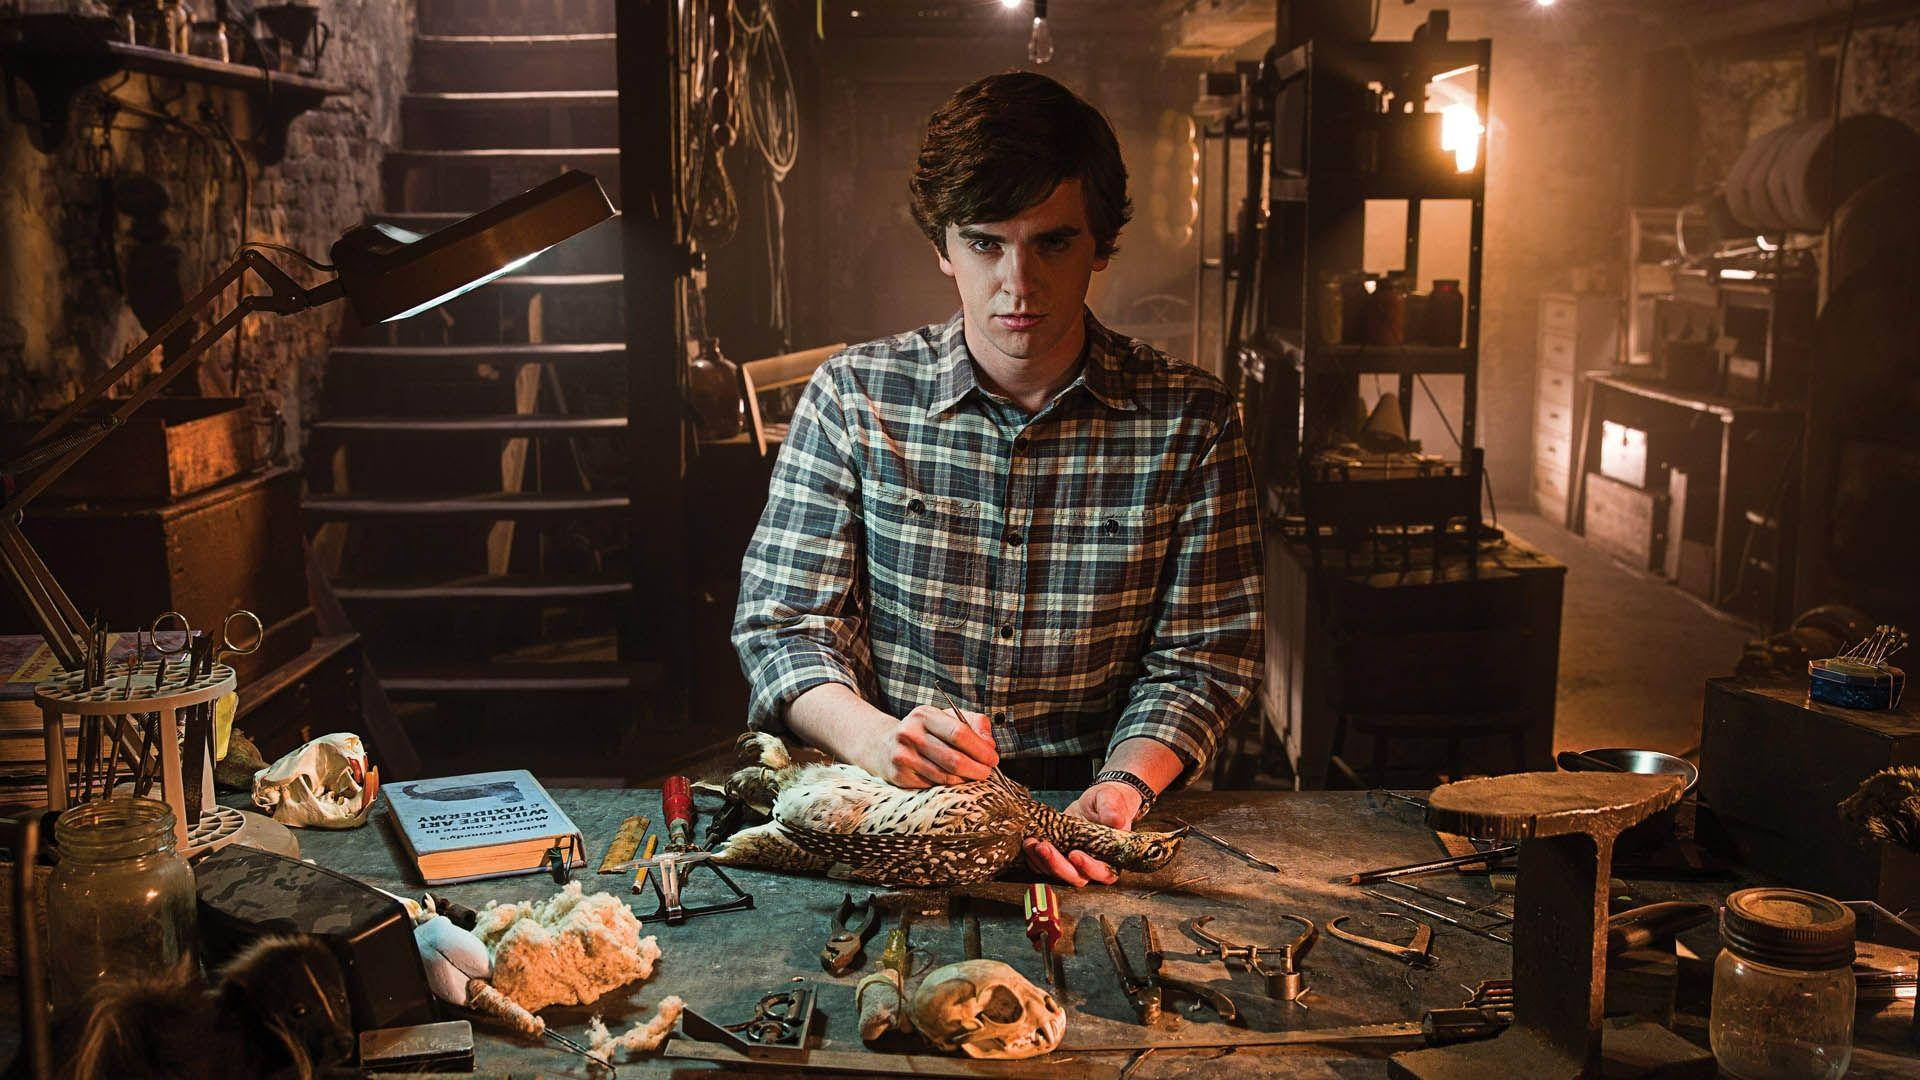 Emotional Scene From Bates Motel Featuring Norman Bates